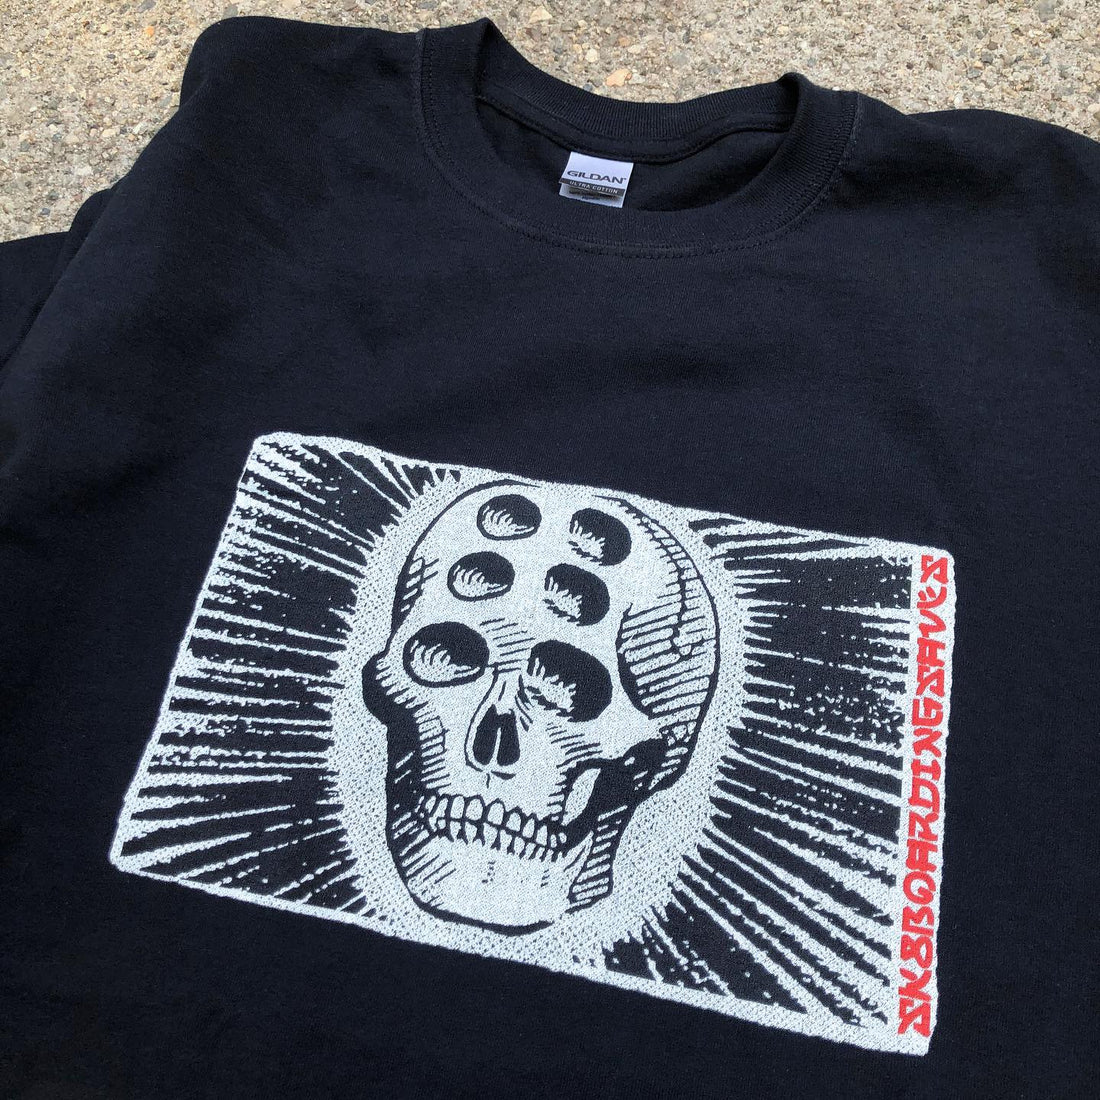 MANDATORY SKULL GRAPHIC
Now at <a...